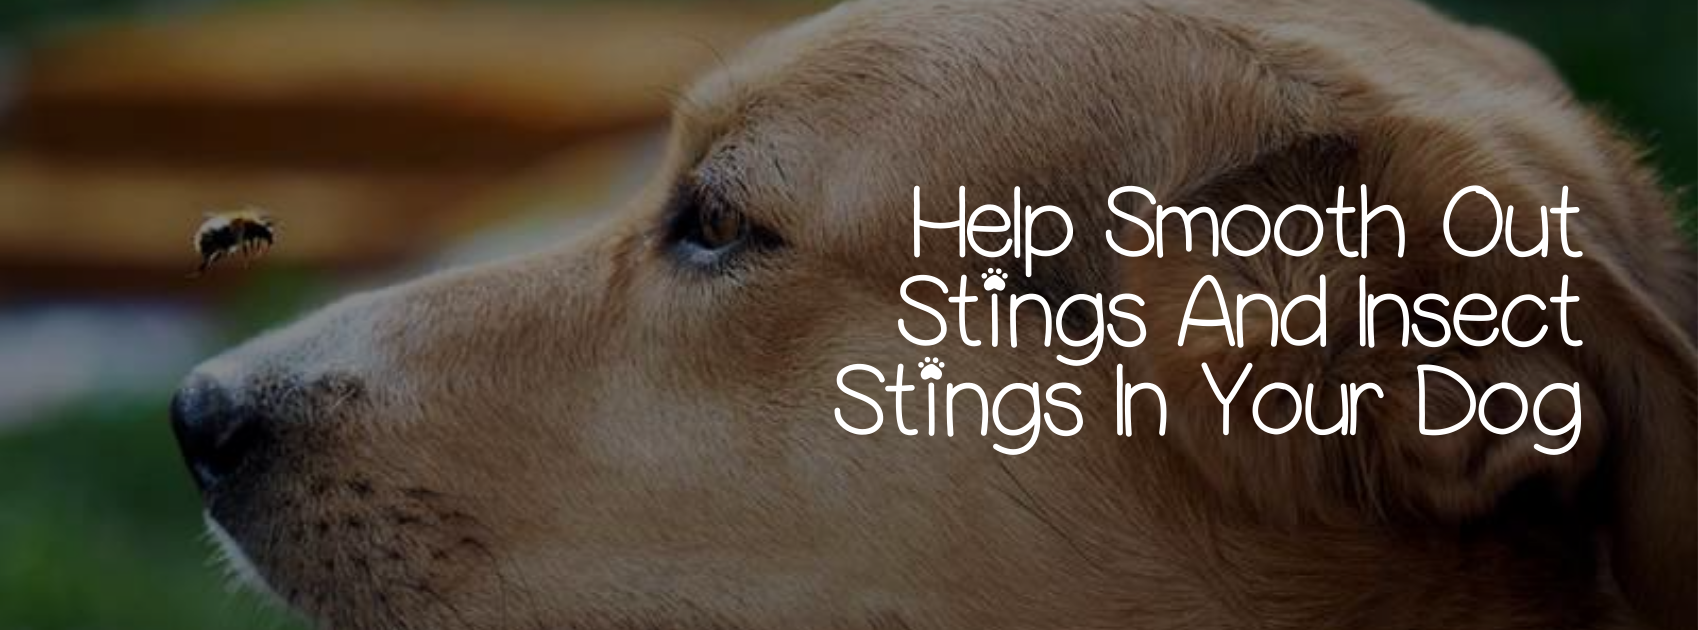 HELP SMOOTH OUT STINGS AND INSECT STINGS IN YOUR DOG